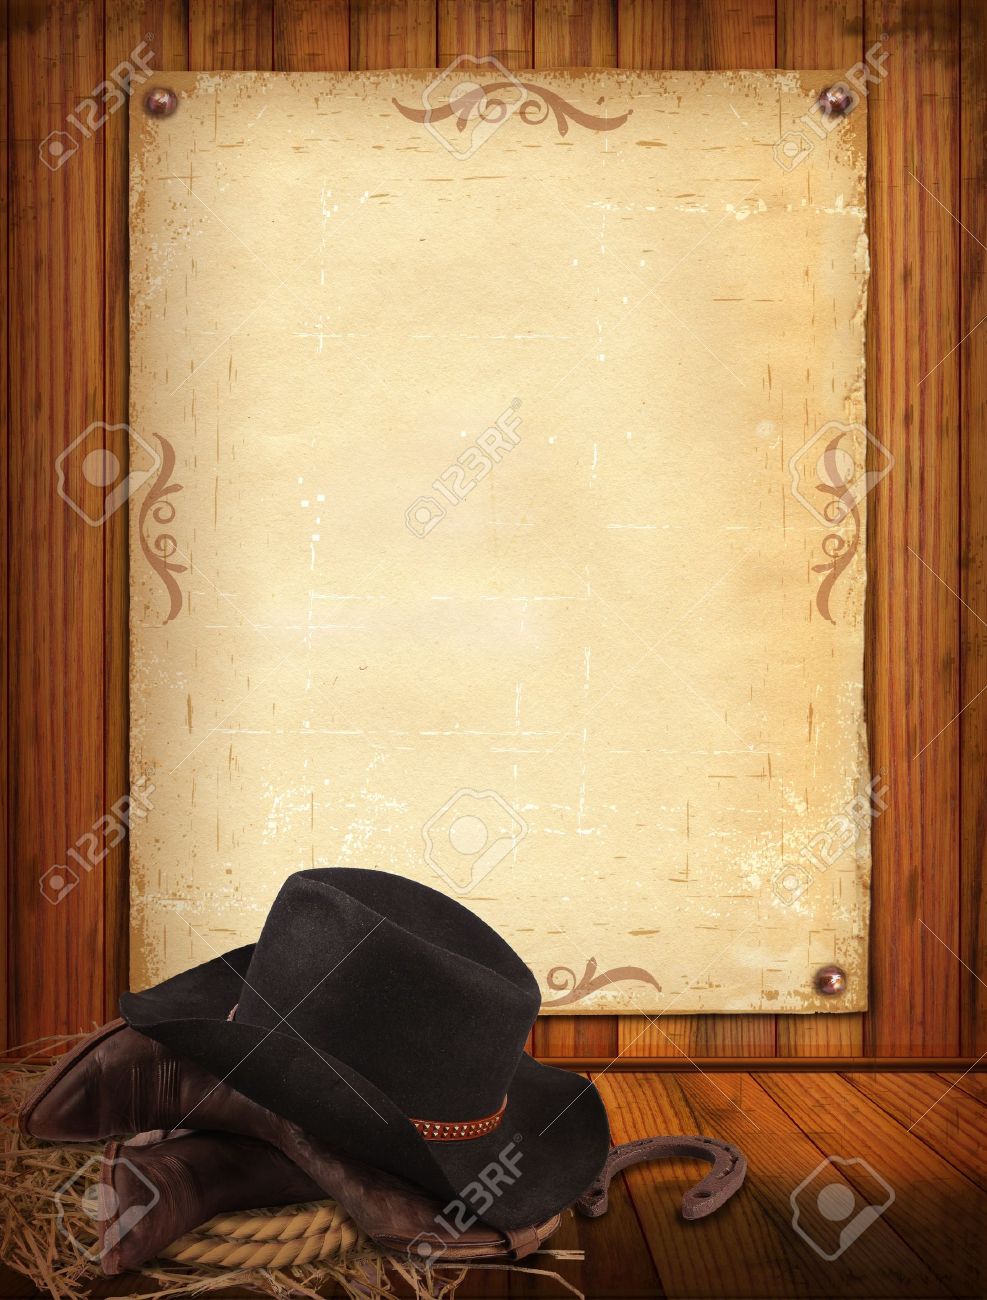 Western Background With Cowboy Clothes And Old Paper Stock Photo